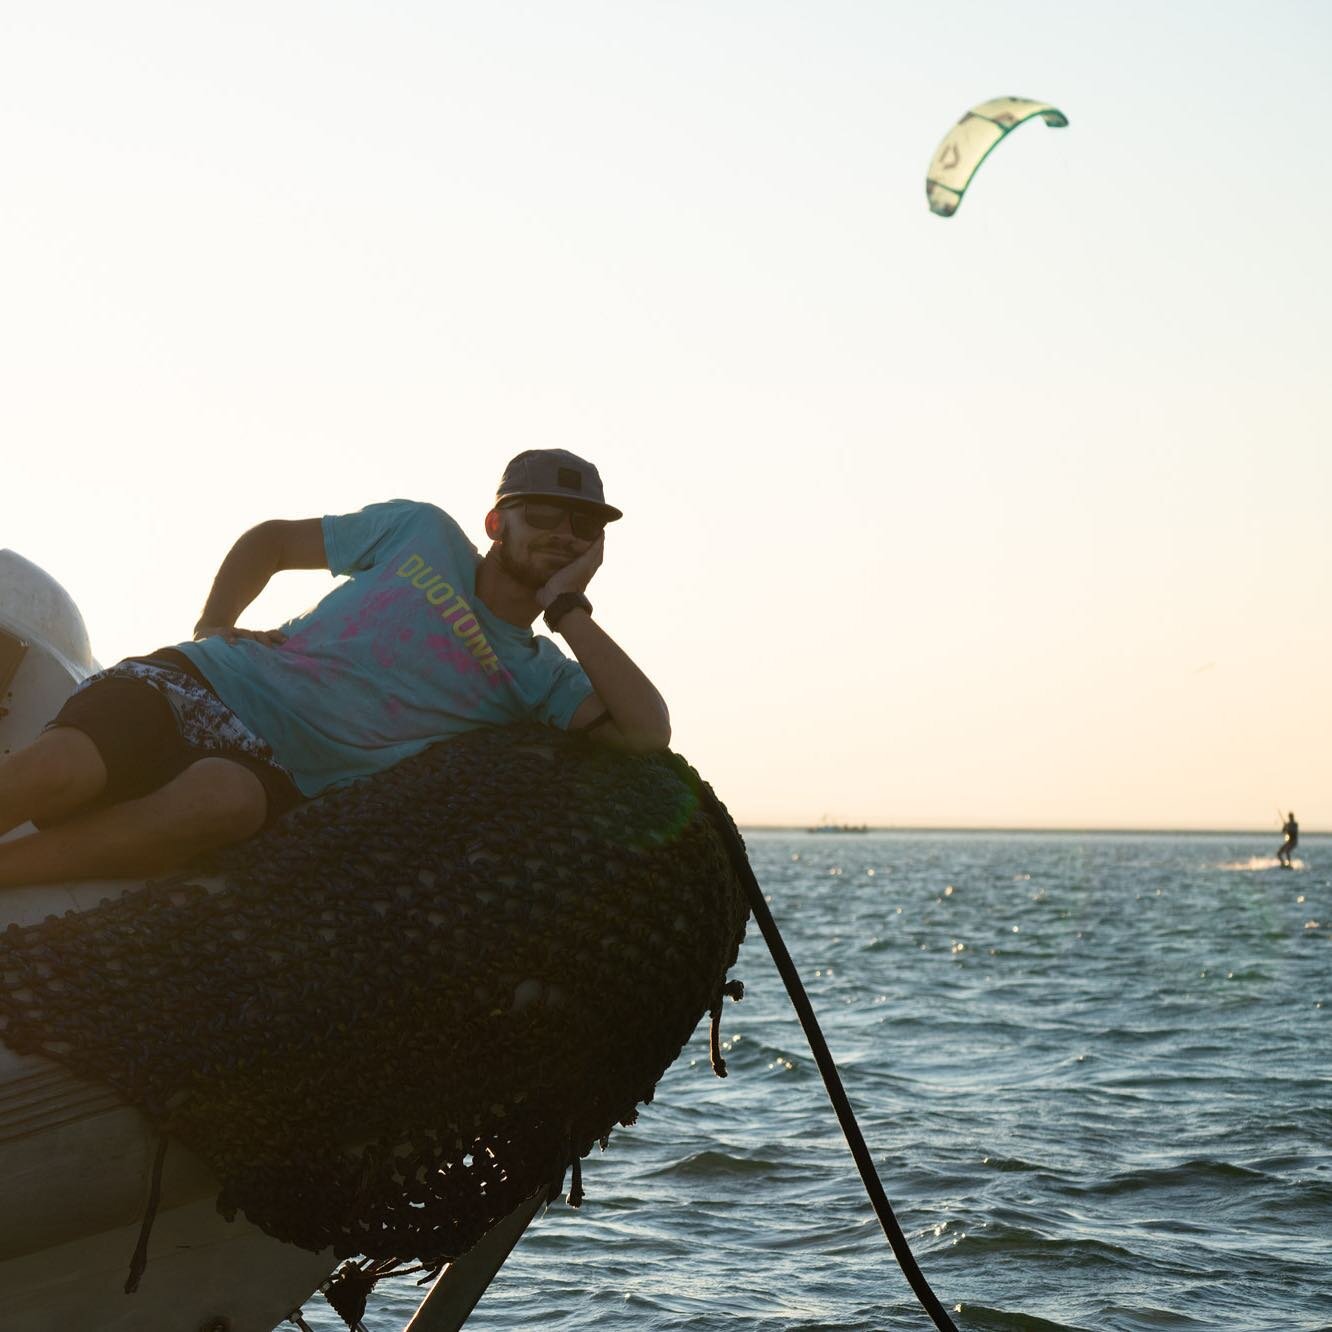 @brendanrider relaxing after a busy waterlaunch session. 
We launch your kites standing deep water at certain spots to keep you away from the crowds and give you more options for uncrowded kitesessions. 

#secretspots #egypt #kitesafari #kitecruise